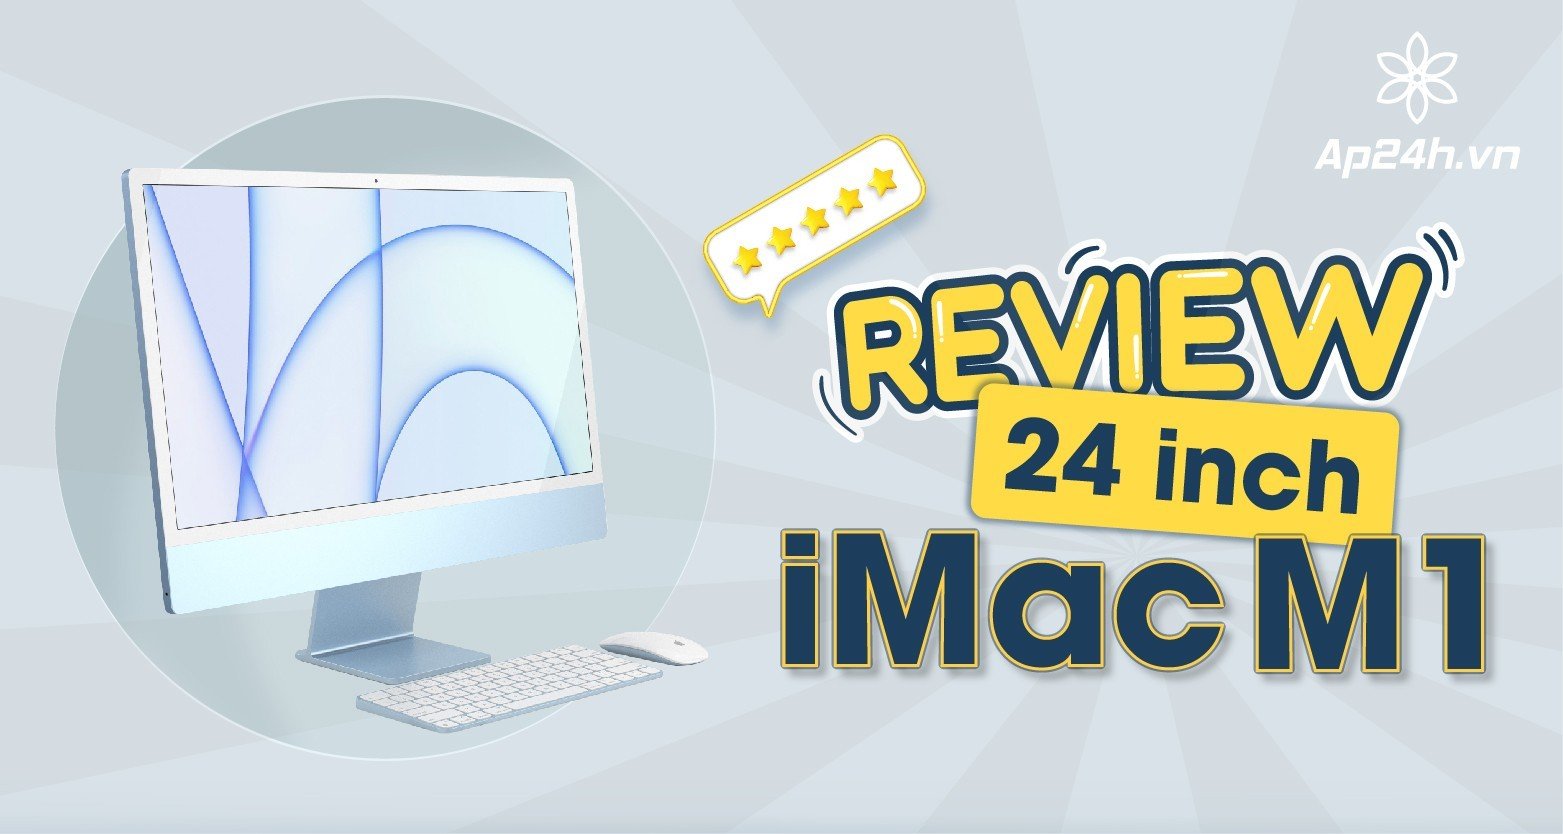  Review iMac 24 inch M1